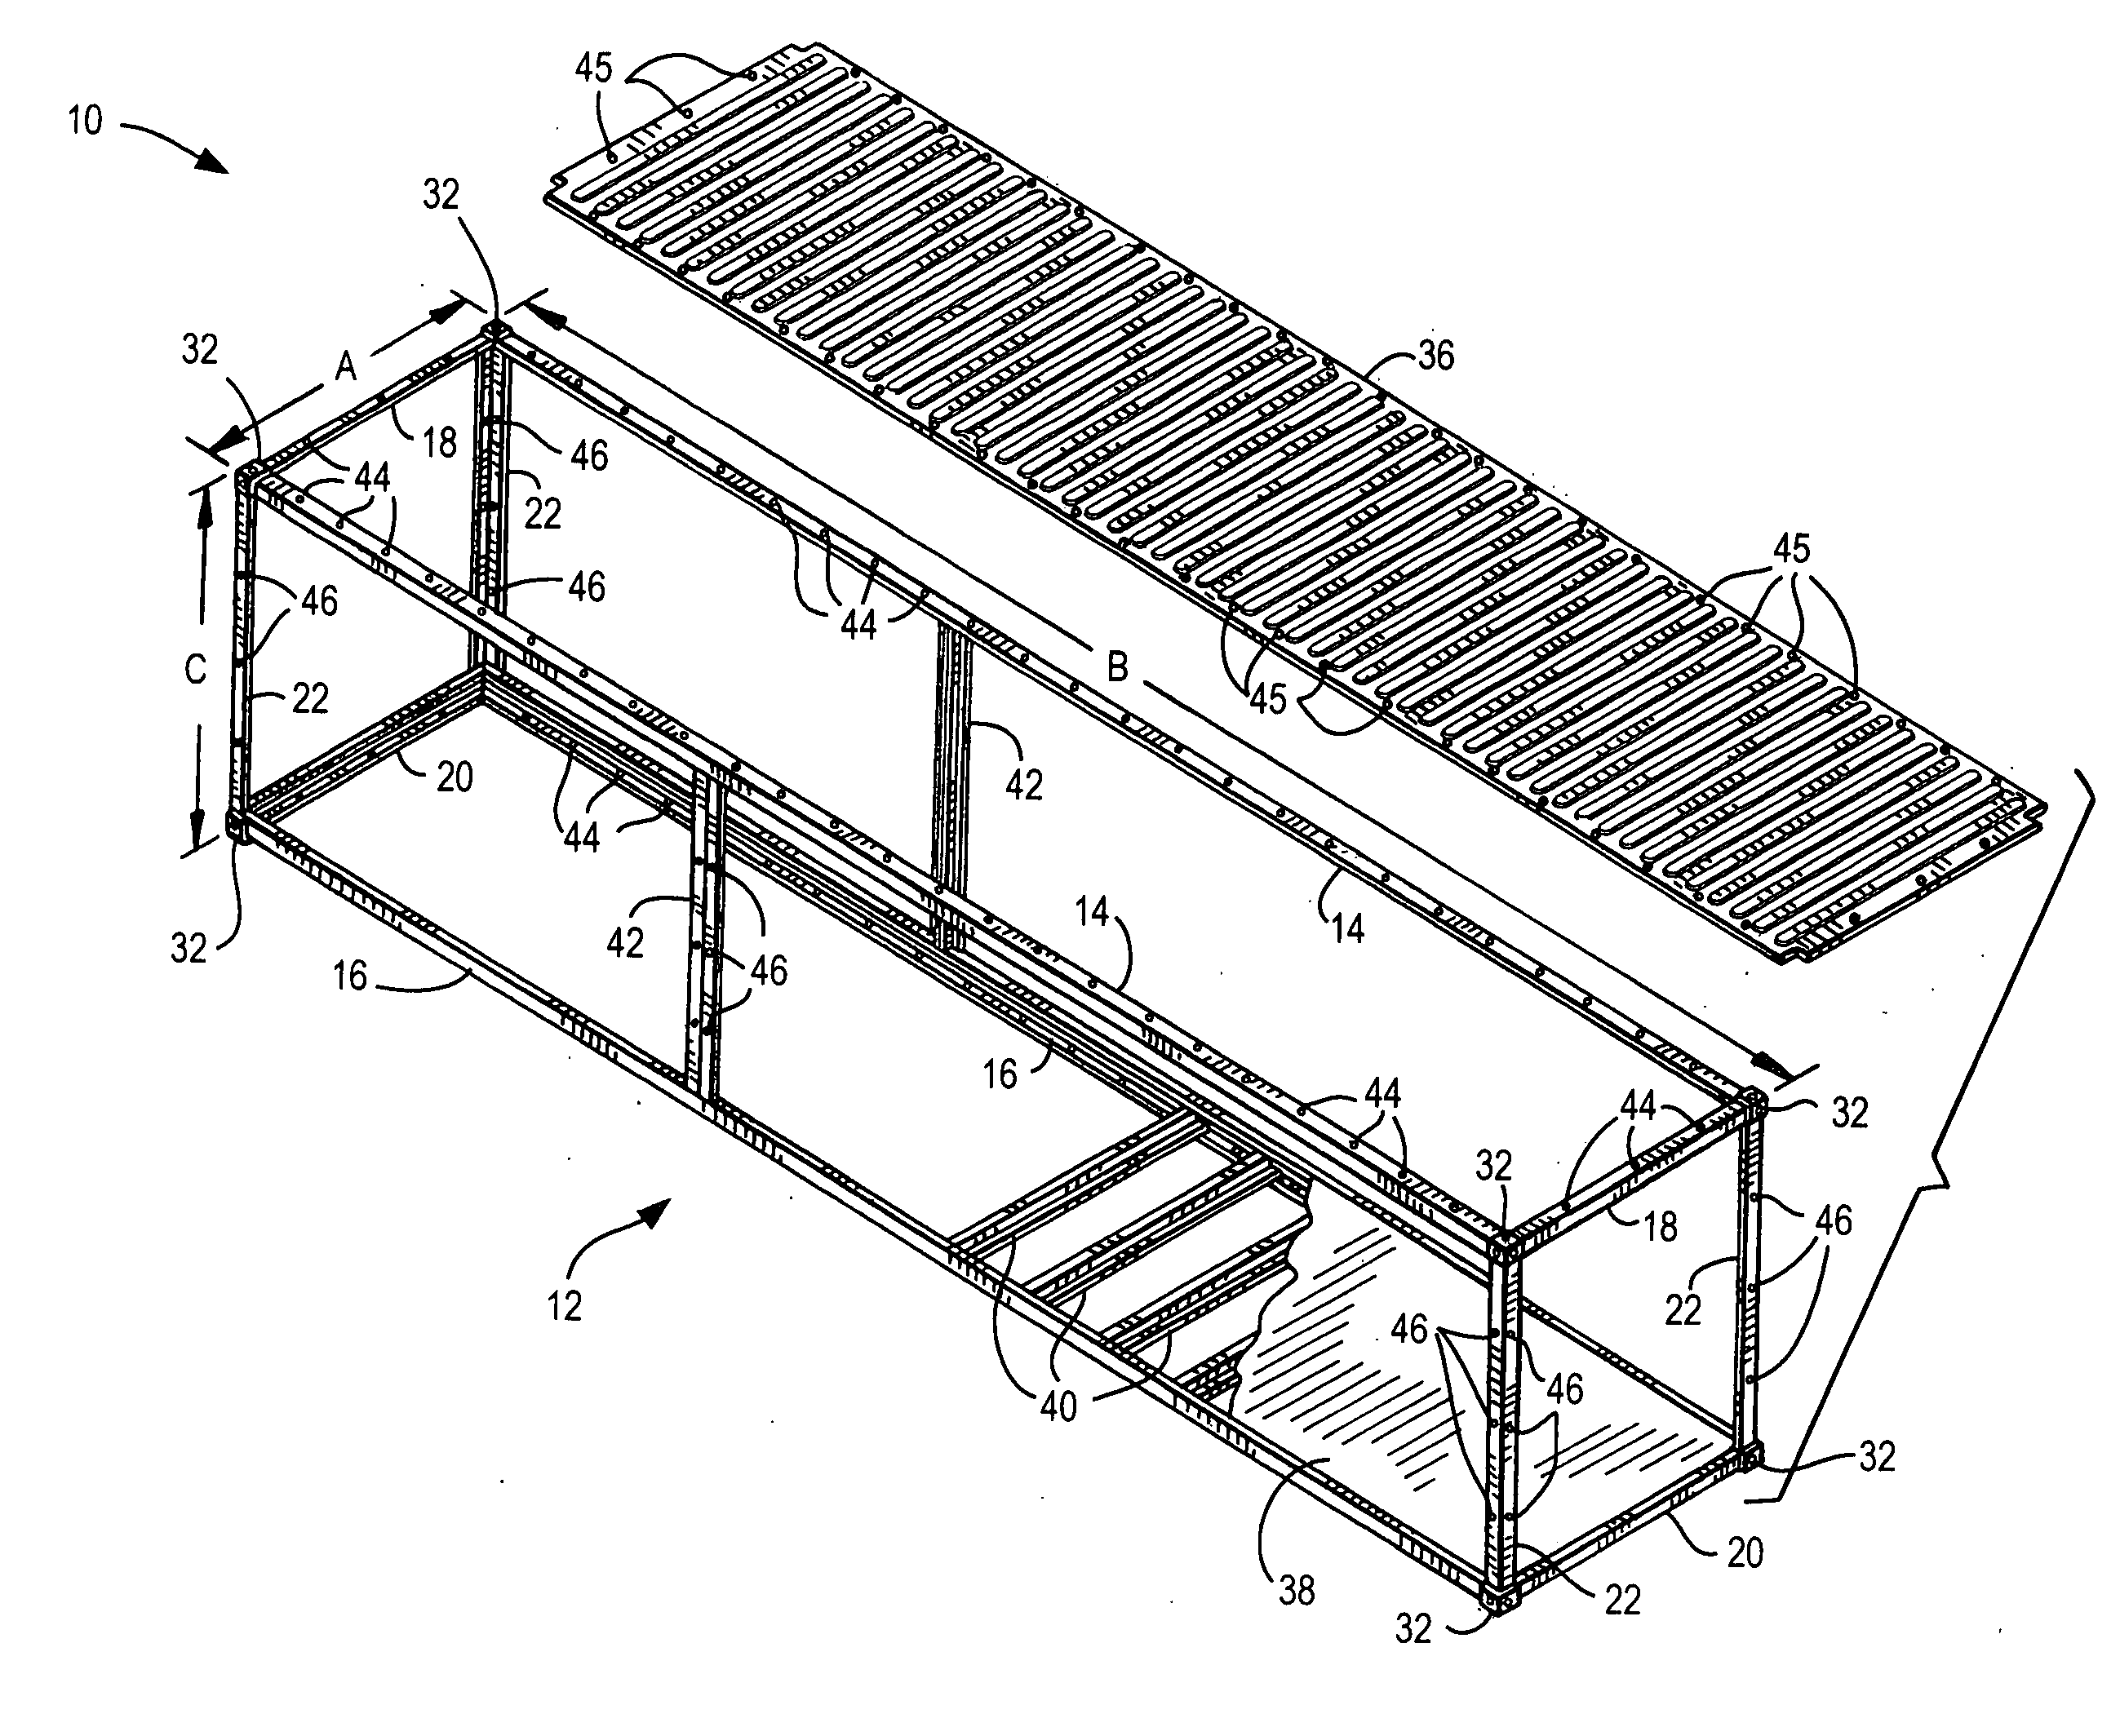 System for modular building construction